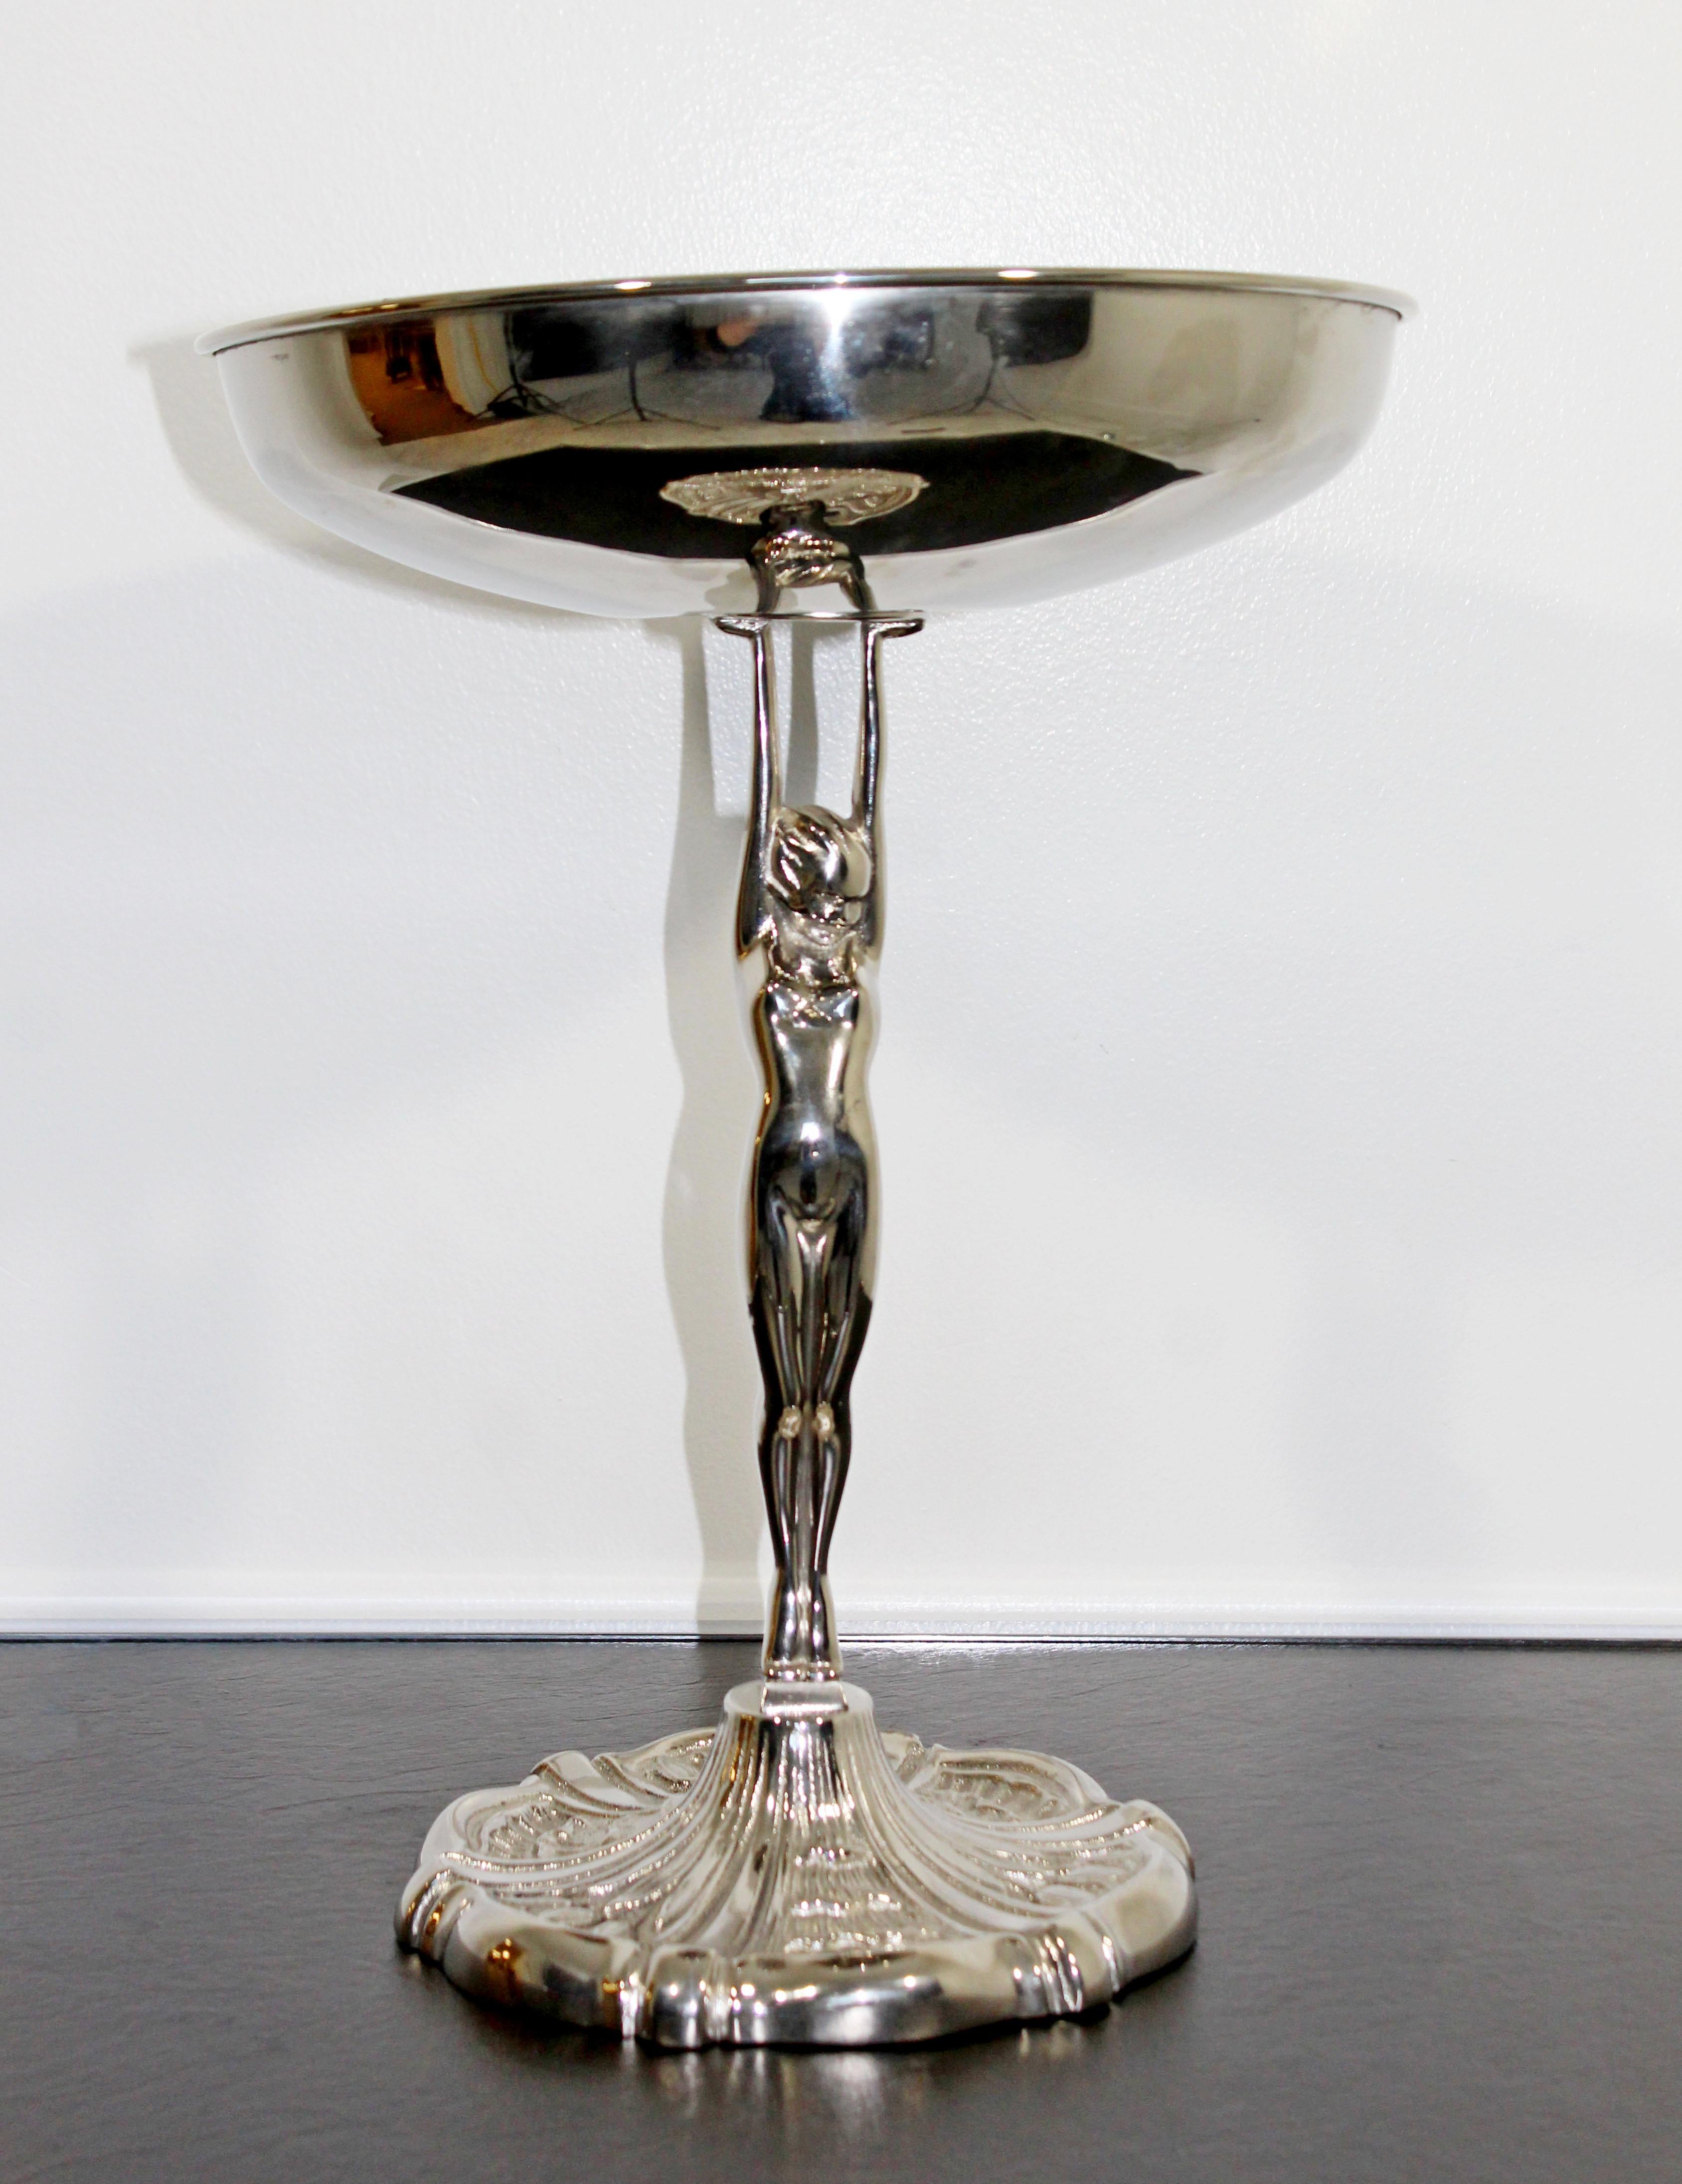 For your consideration is a fantastic, Frankart, aluminum cast pedestal or art bowl, with a nude woman for the stem, circa the 1940s. In very good condition. The dimensions are 11